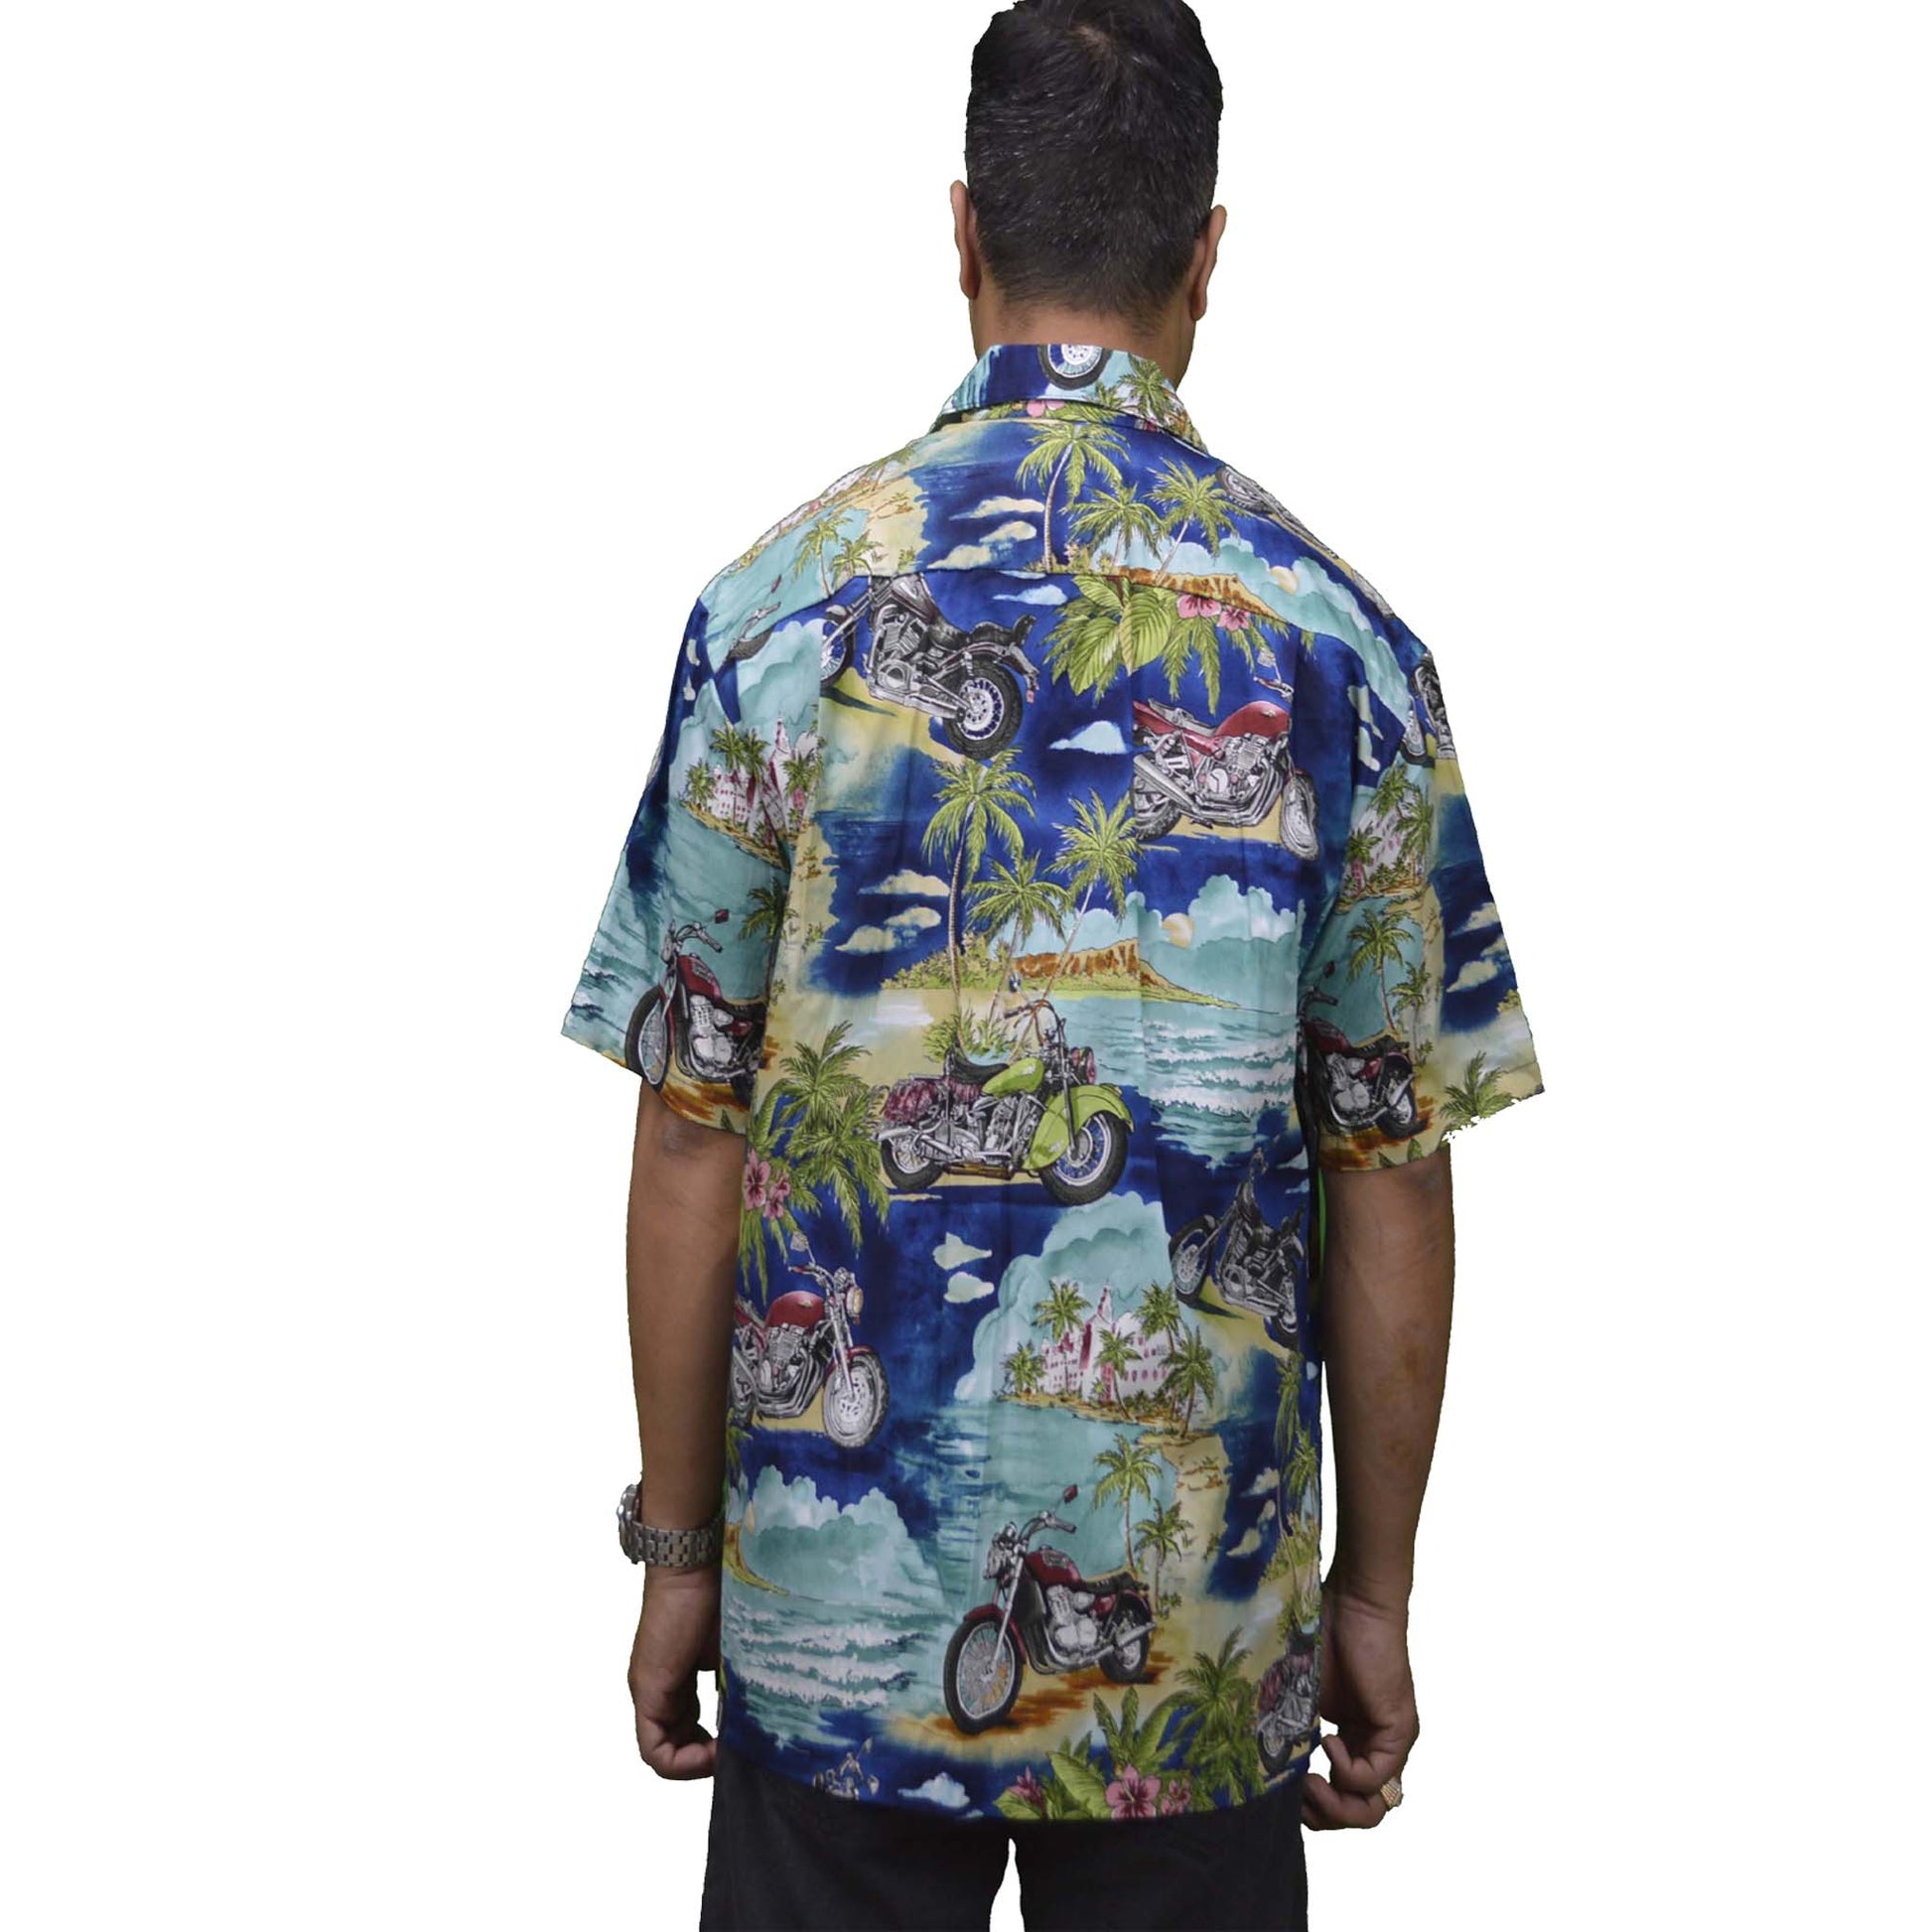 authentic hawaiian cotton shirt with motorcycle scene